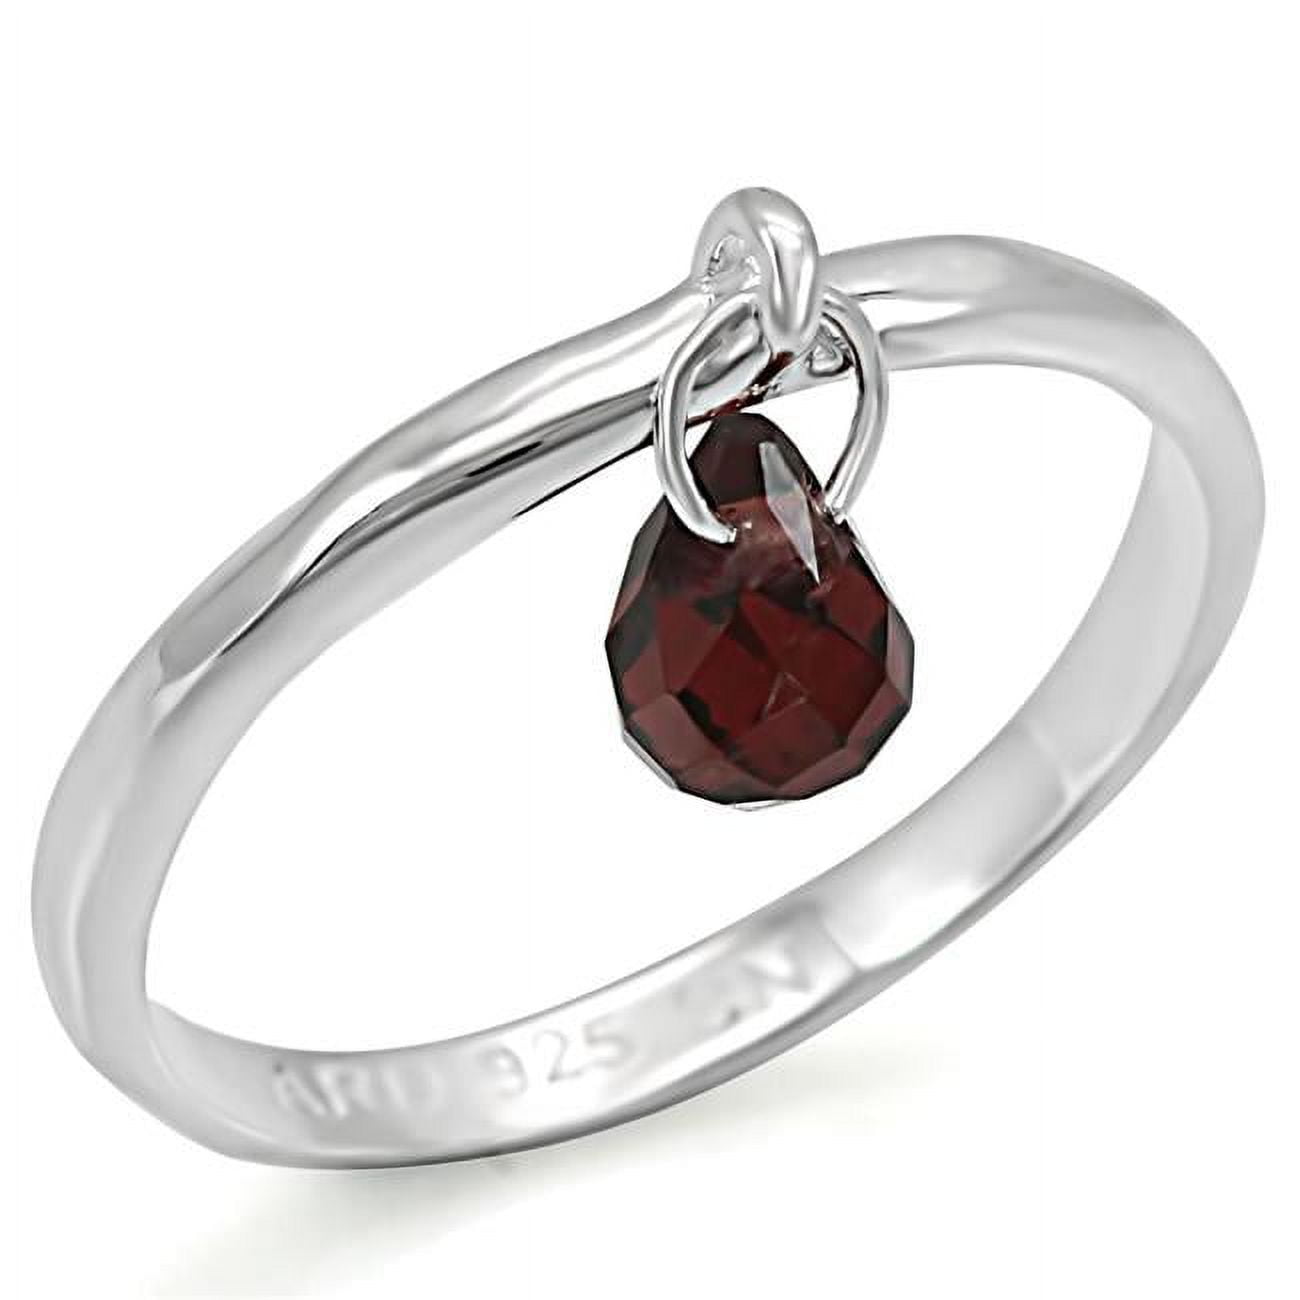 Picture of Alamode LOS320-9 Women Silver 925 Sterling Silver Ring with Genuine Stone in Garnet - Size 9